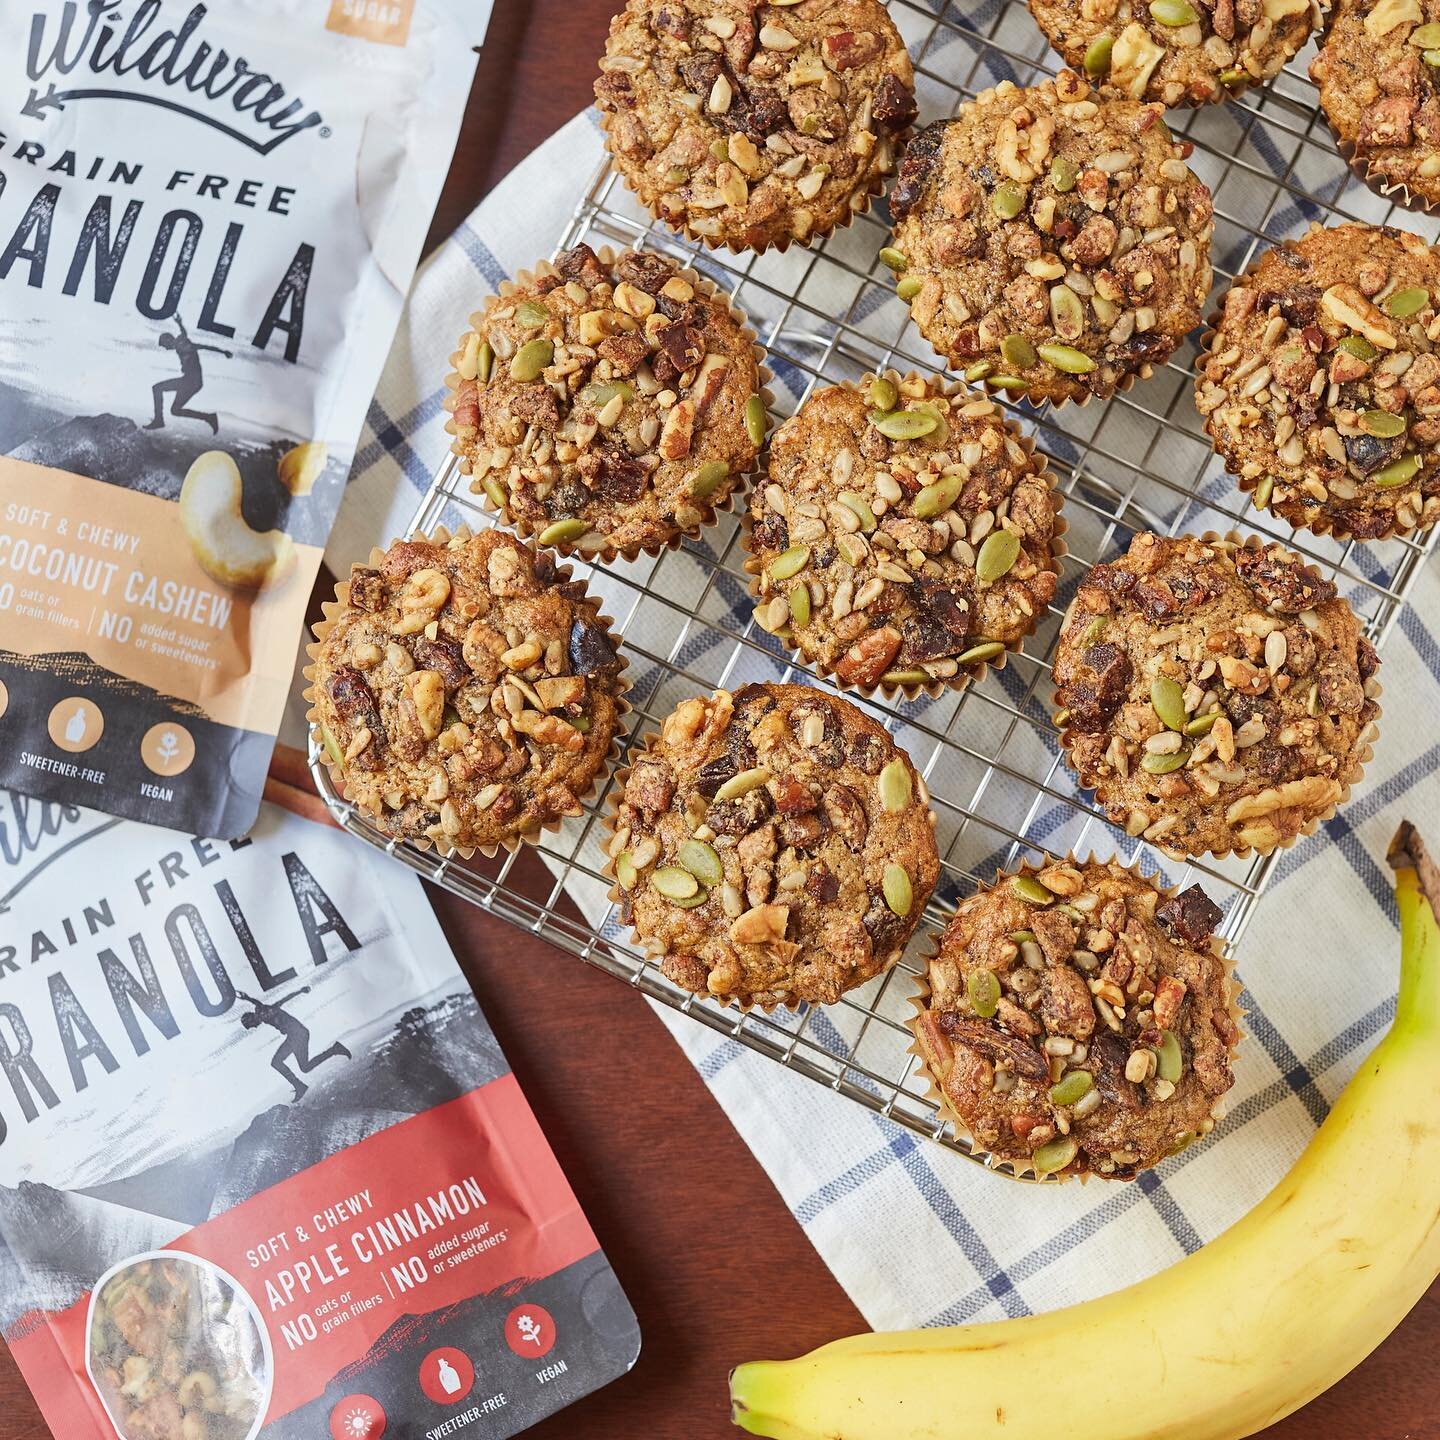 Rise N&rsquo; Shine!!! Are you ready for these paleo chocolate chip banana nut muffins? 🍌 
⠀⠀⠀⠀⠀⠀⠀⠀⠀
So excited to share my favorite muffin recipe with y&rsquo;all on the blog this morning. @wildwayoflife was nice enough to send me a shipment of the